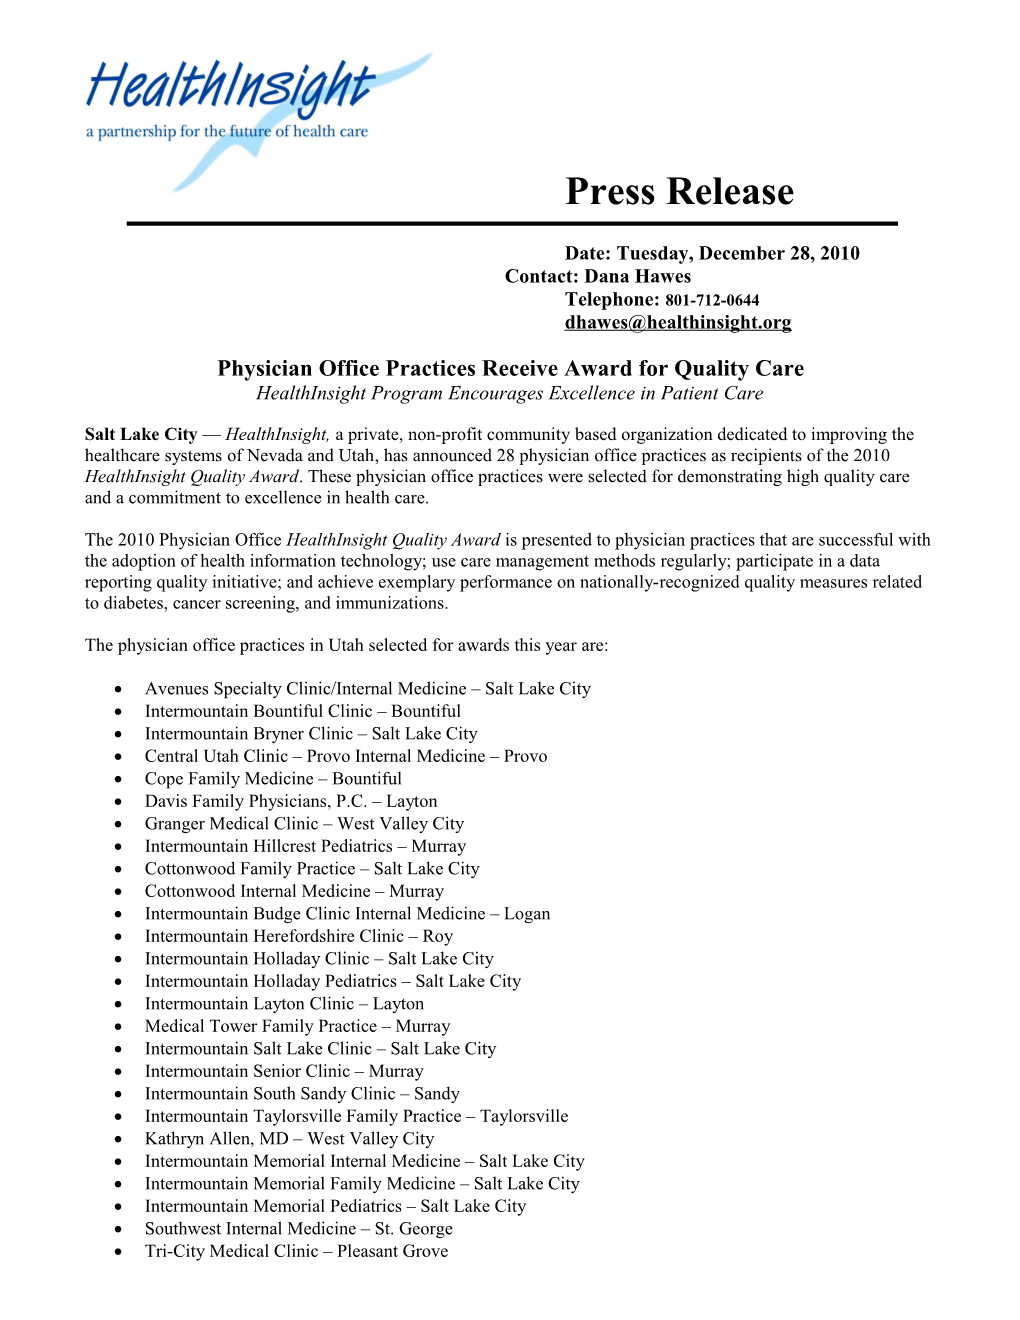 Physician Office Practices Receive Award for Quality Care